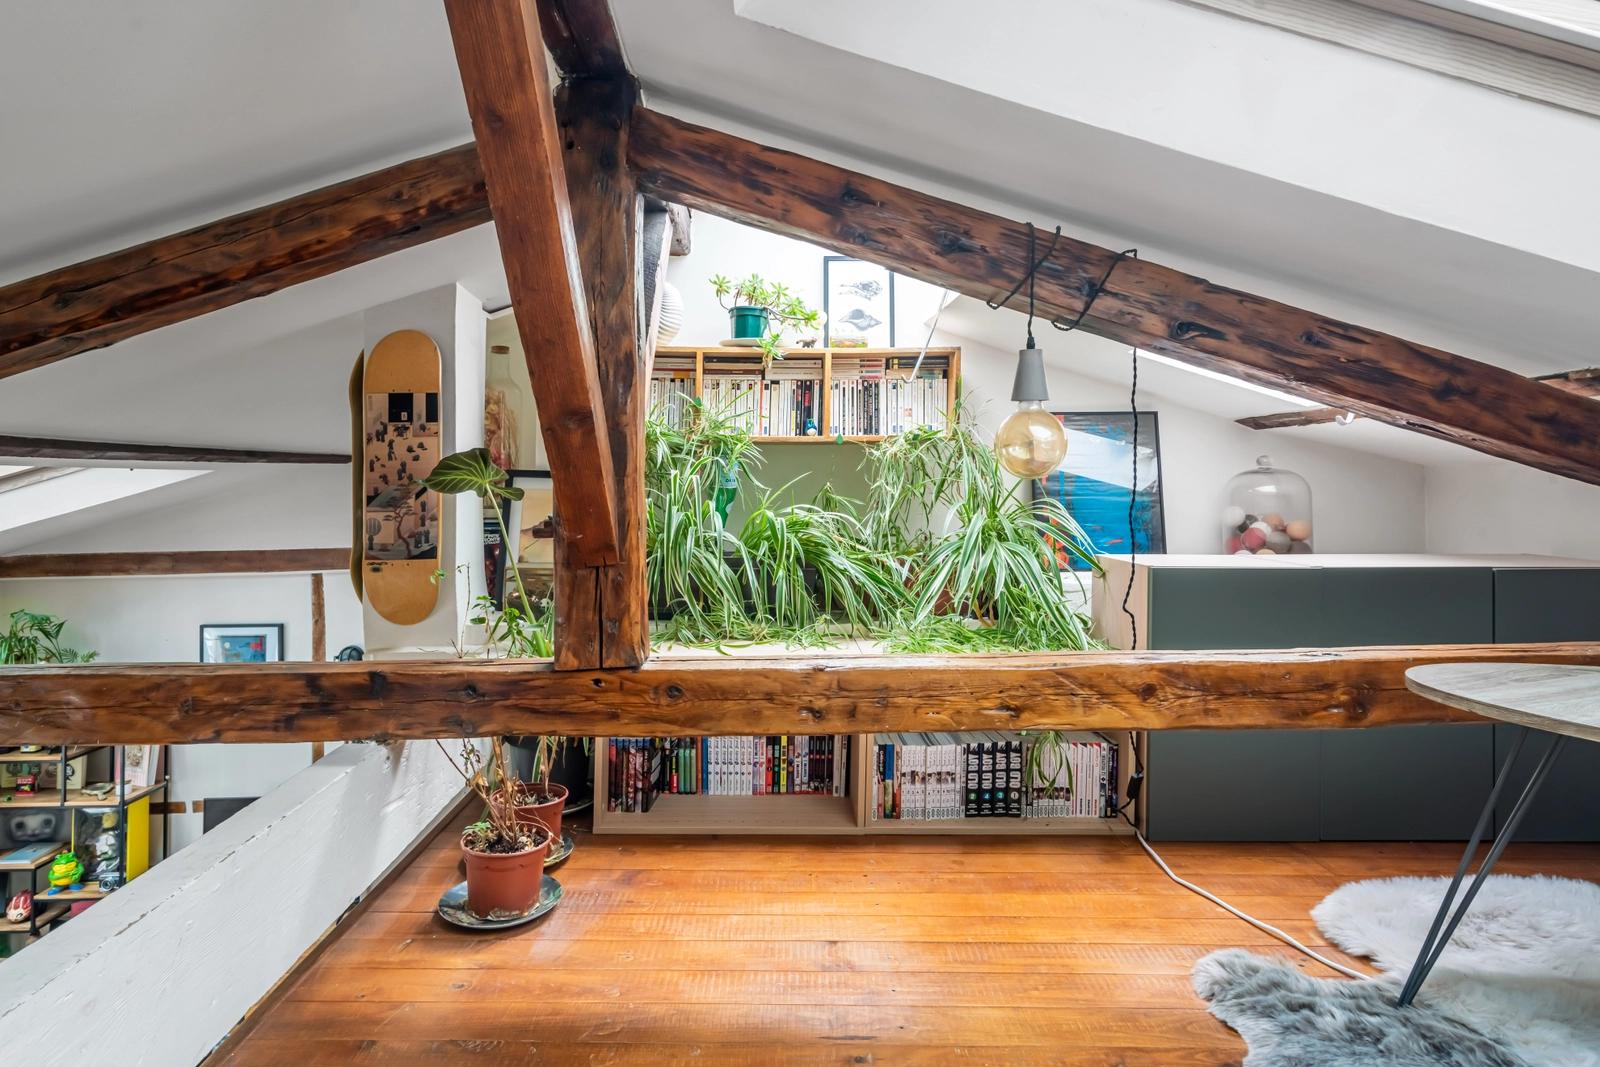 Space Magnificent apartment with beams Pigalle - 2